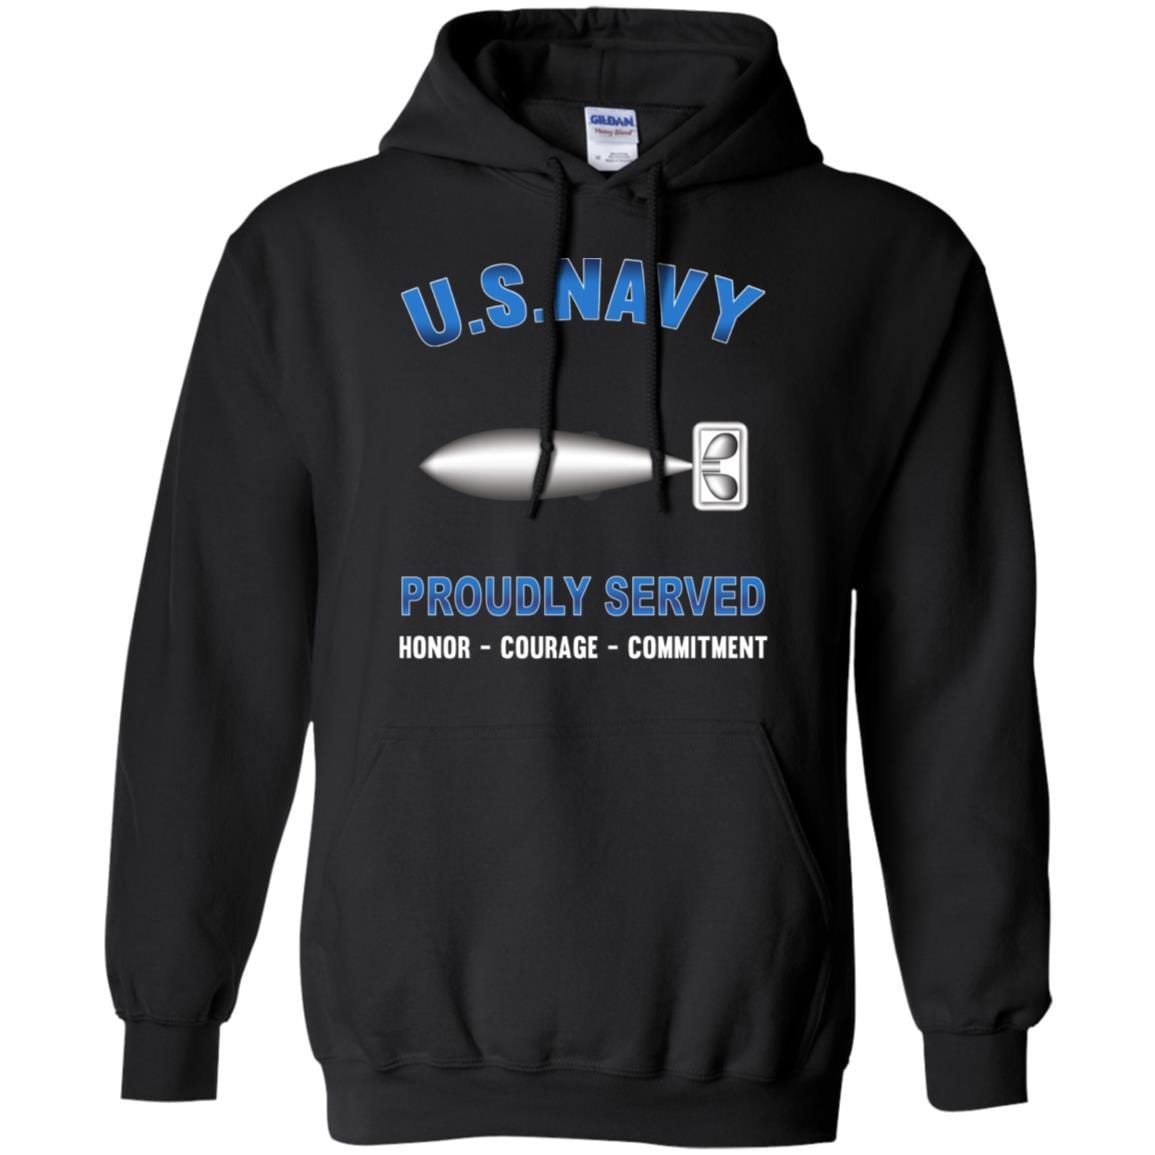 U.S Navy Torpedoman's mate Navy TM - Proudly Served T-Shirt For Men On Front-TShirt-Navy-Veterans Nation